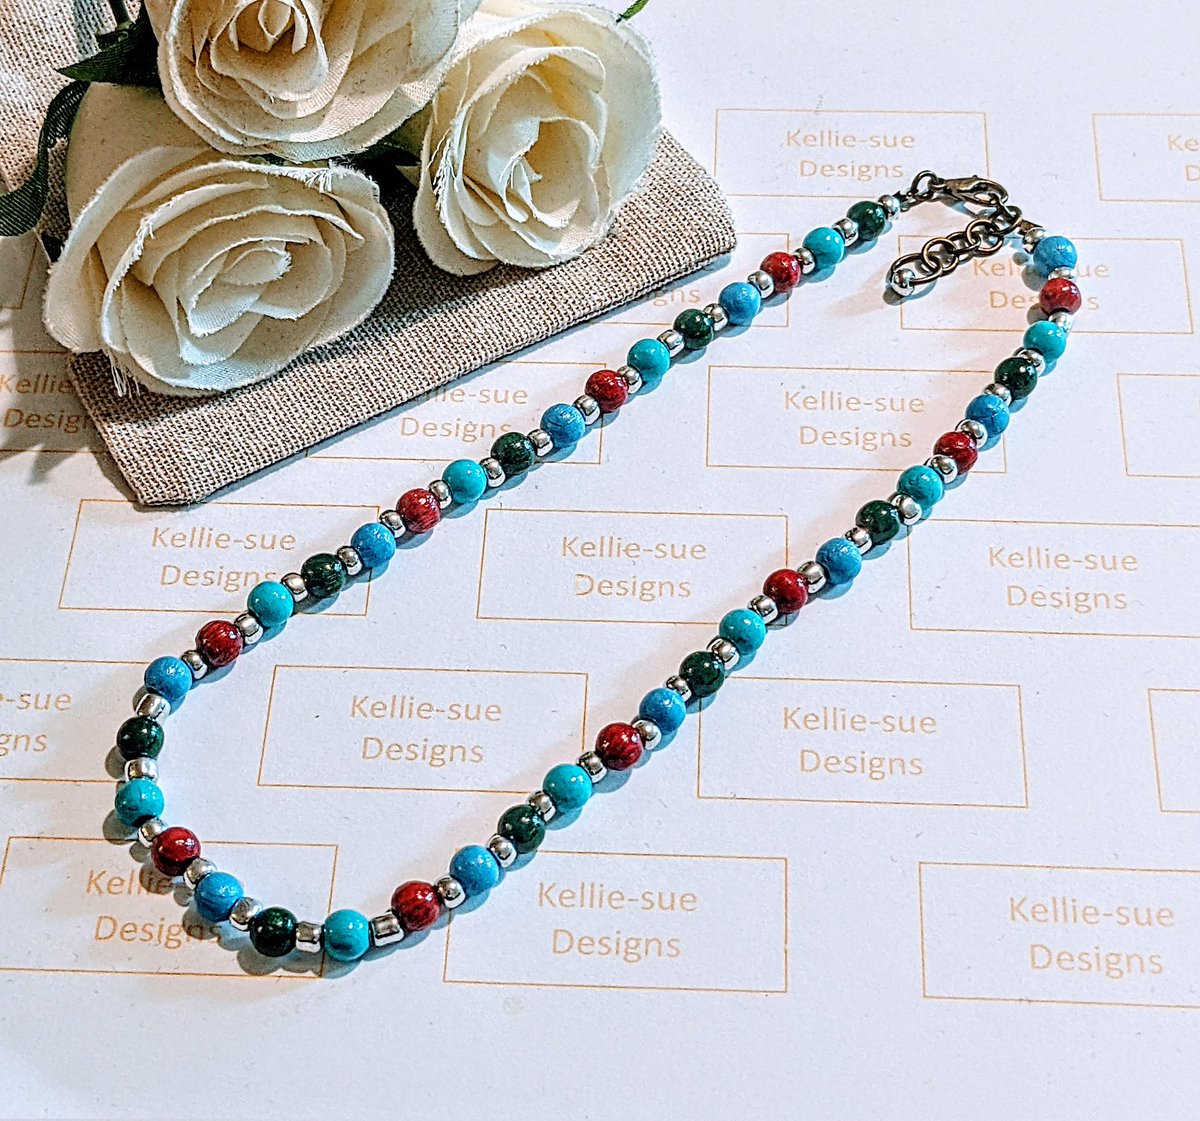 #handmade multicoloured wood beaded necklace with a vintage brass finish. Multiple length options.
Available Here ⬇️ 
kelliesuedesigns.etsy.com/listing/150206…
.
#EarlyBiz #EarlyRisers #jewelryaddict #etsy #MHHSBD #giftideas #stockingstuffers #shopping #elevenseshour